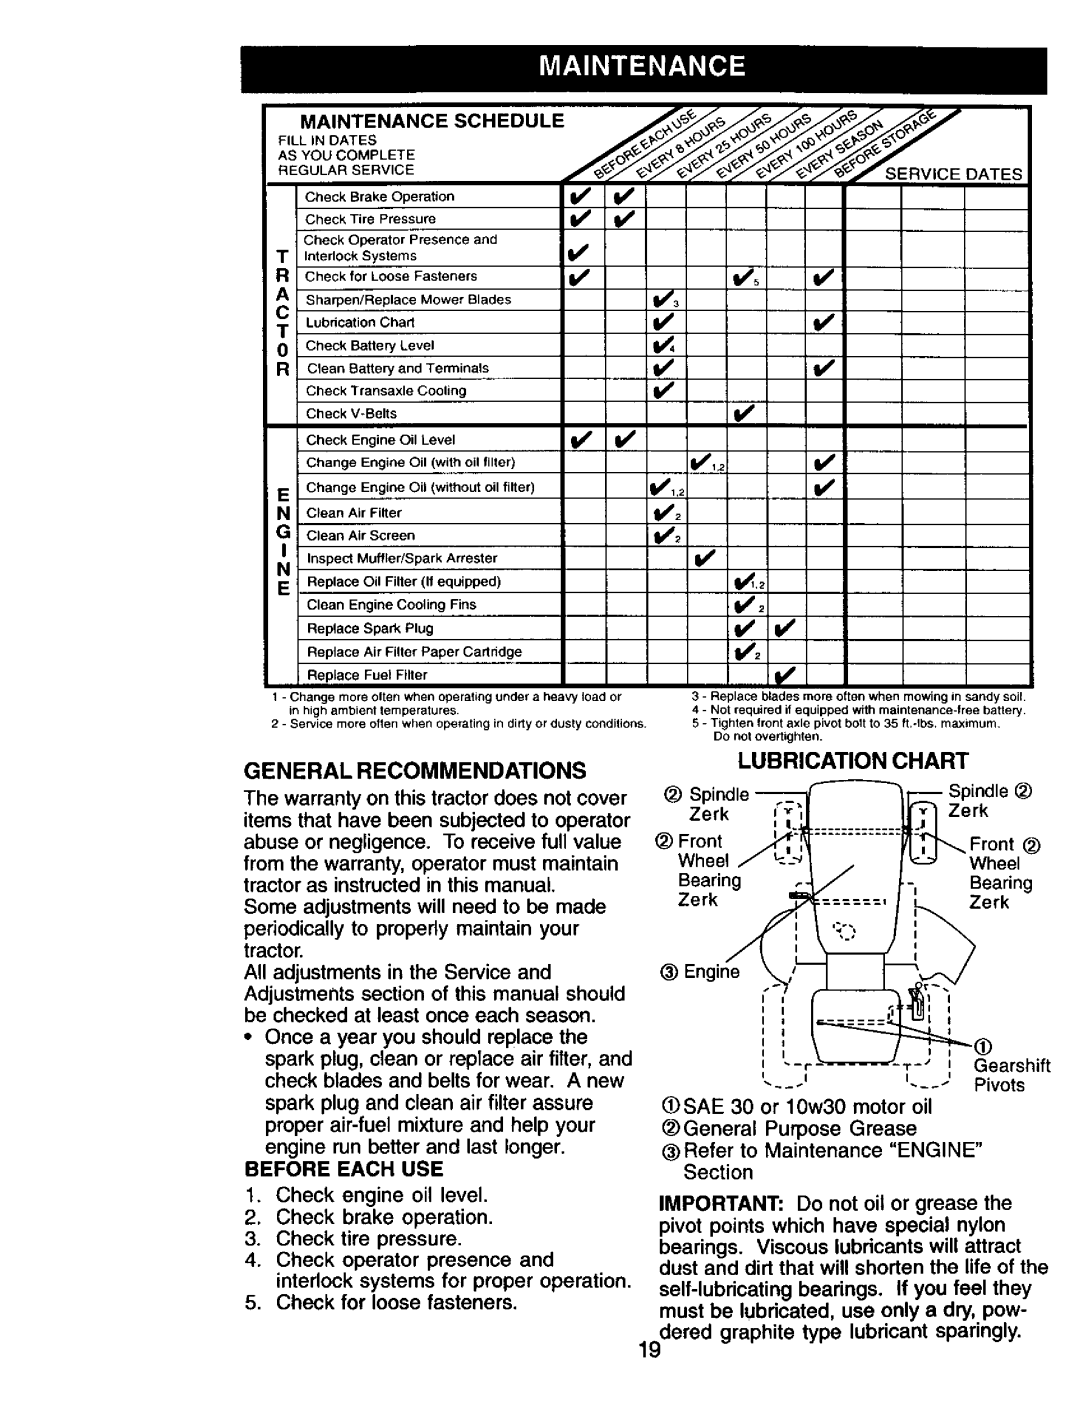 Craftsman 917.271815 owner manual F,Ll.Oates, General Recommendations 